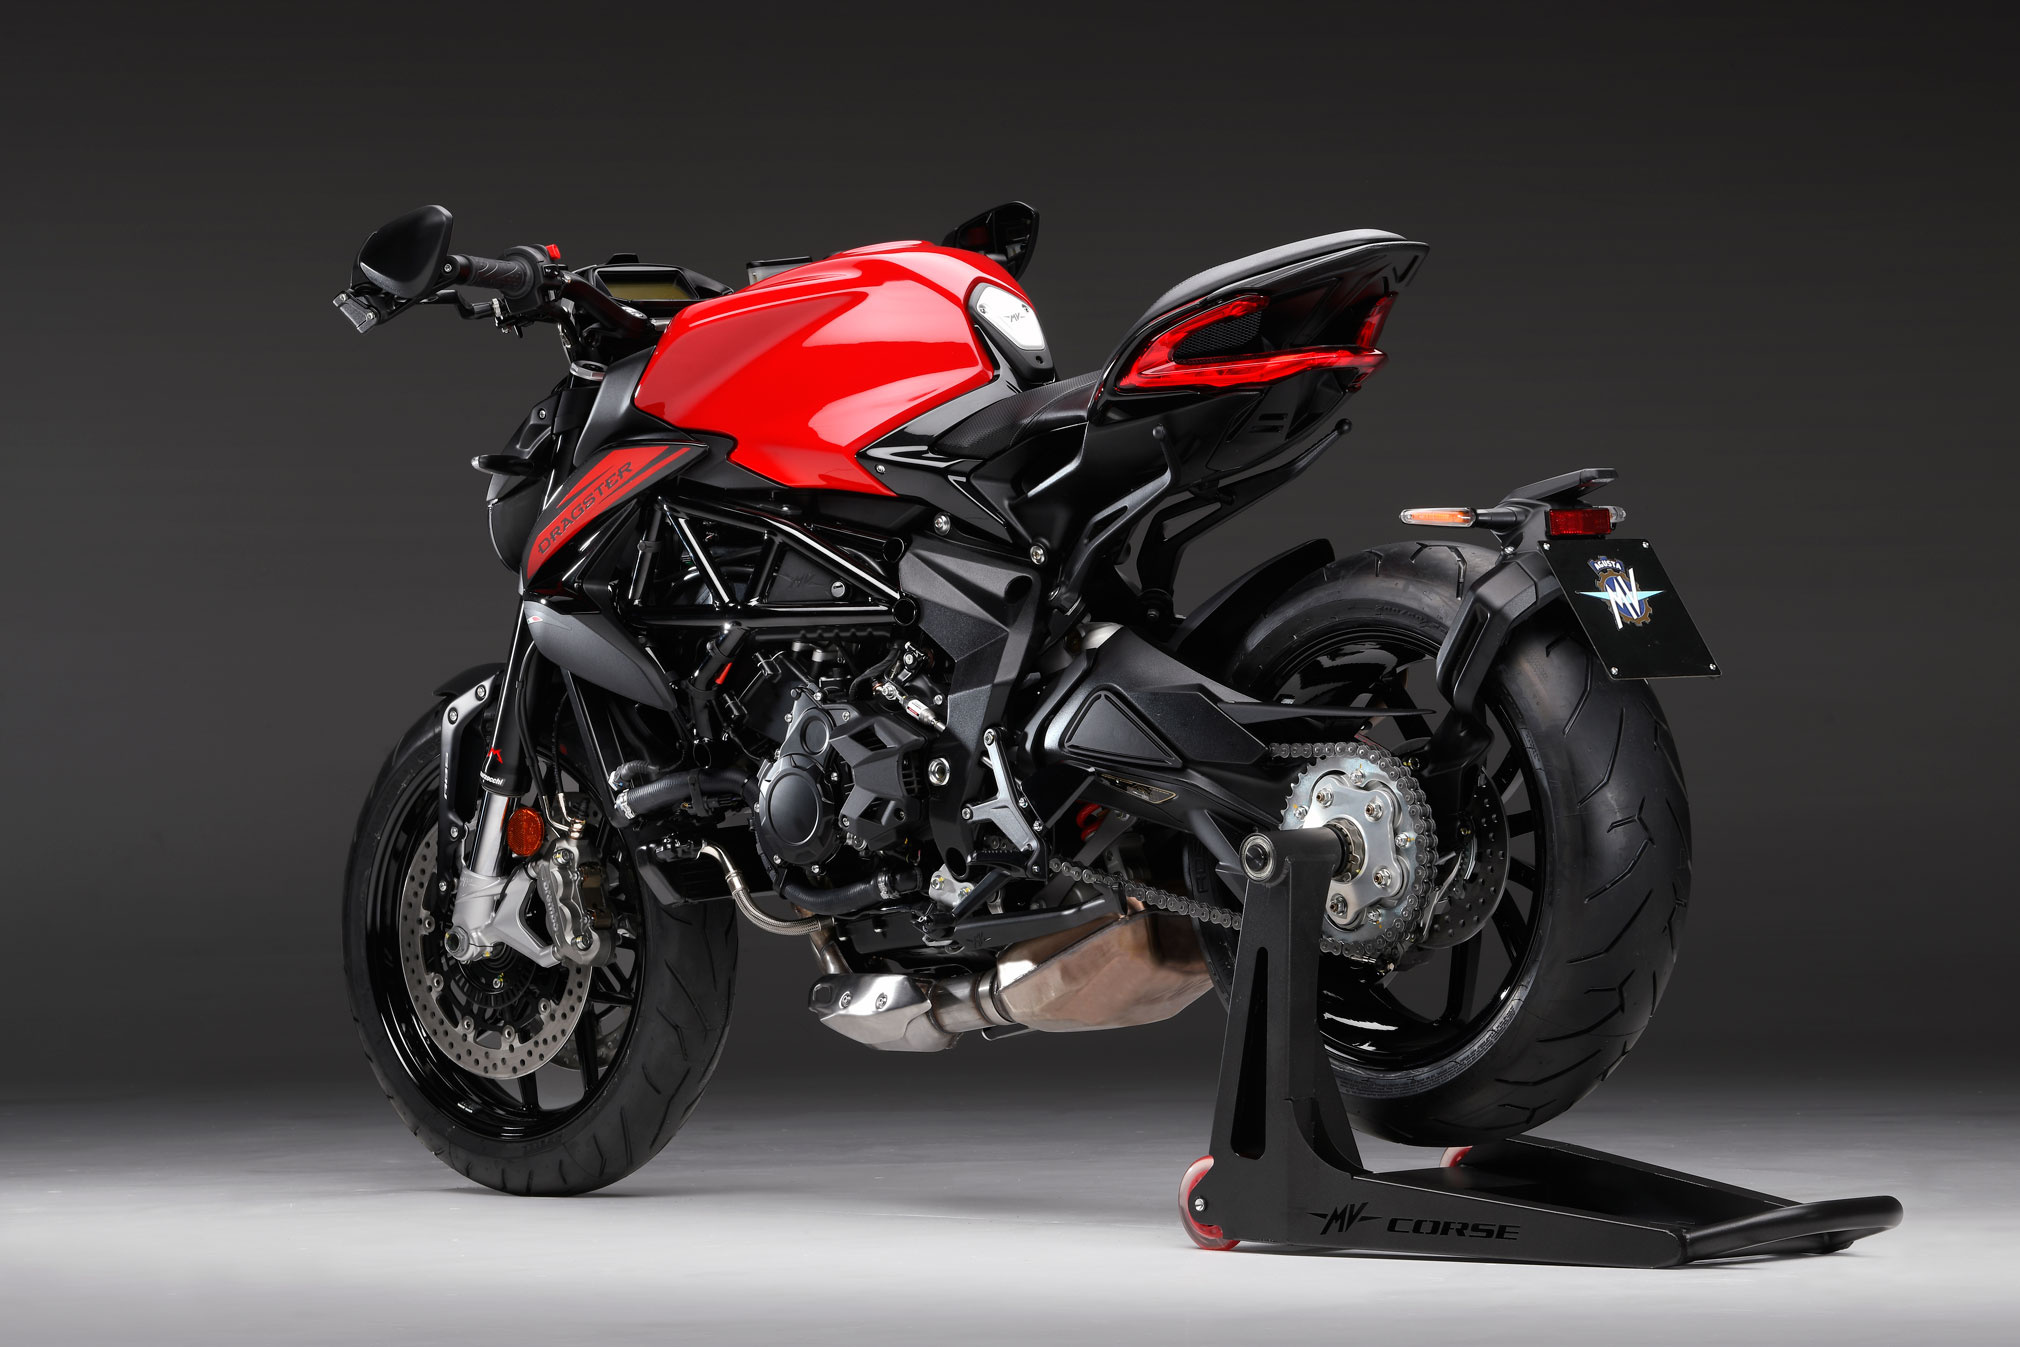 MV Agusta Dragster Rosso, Auto guide, Total motorcycle, 2020, 2020x1350 HD Desktop